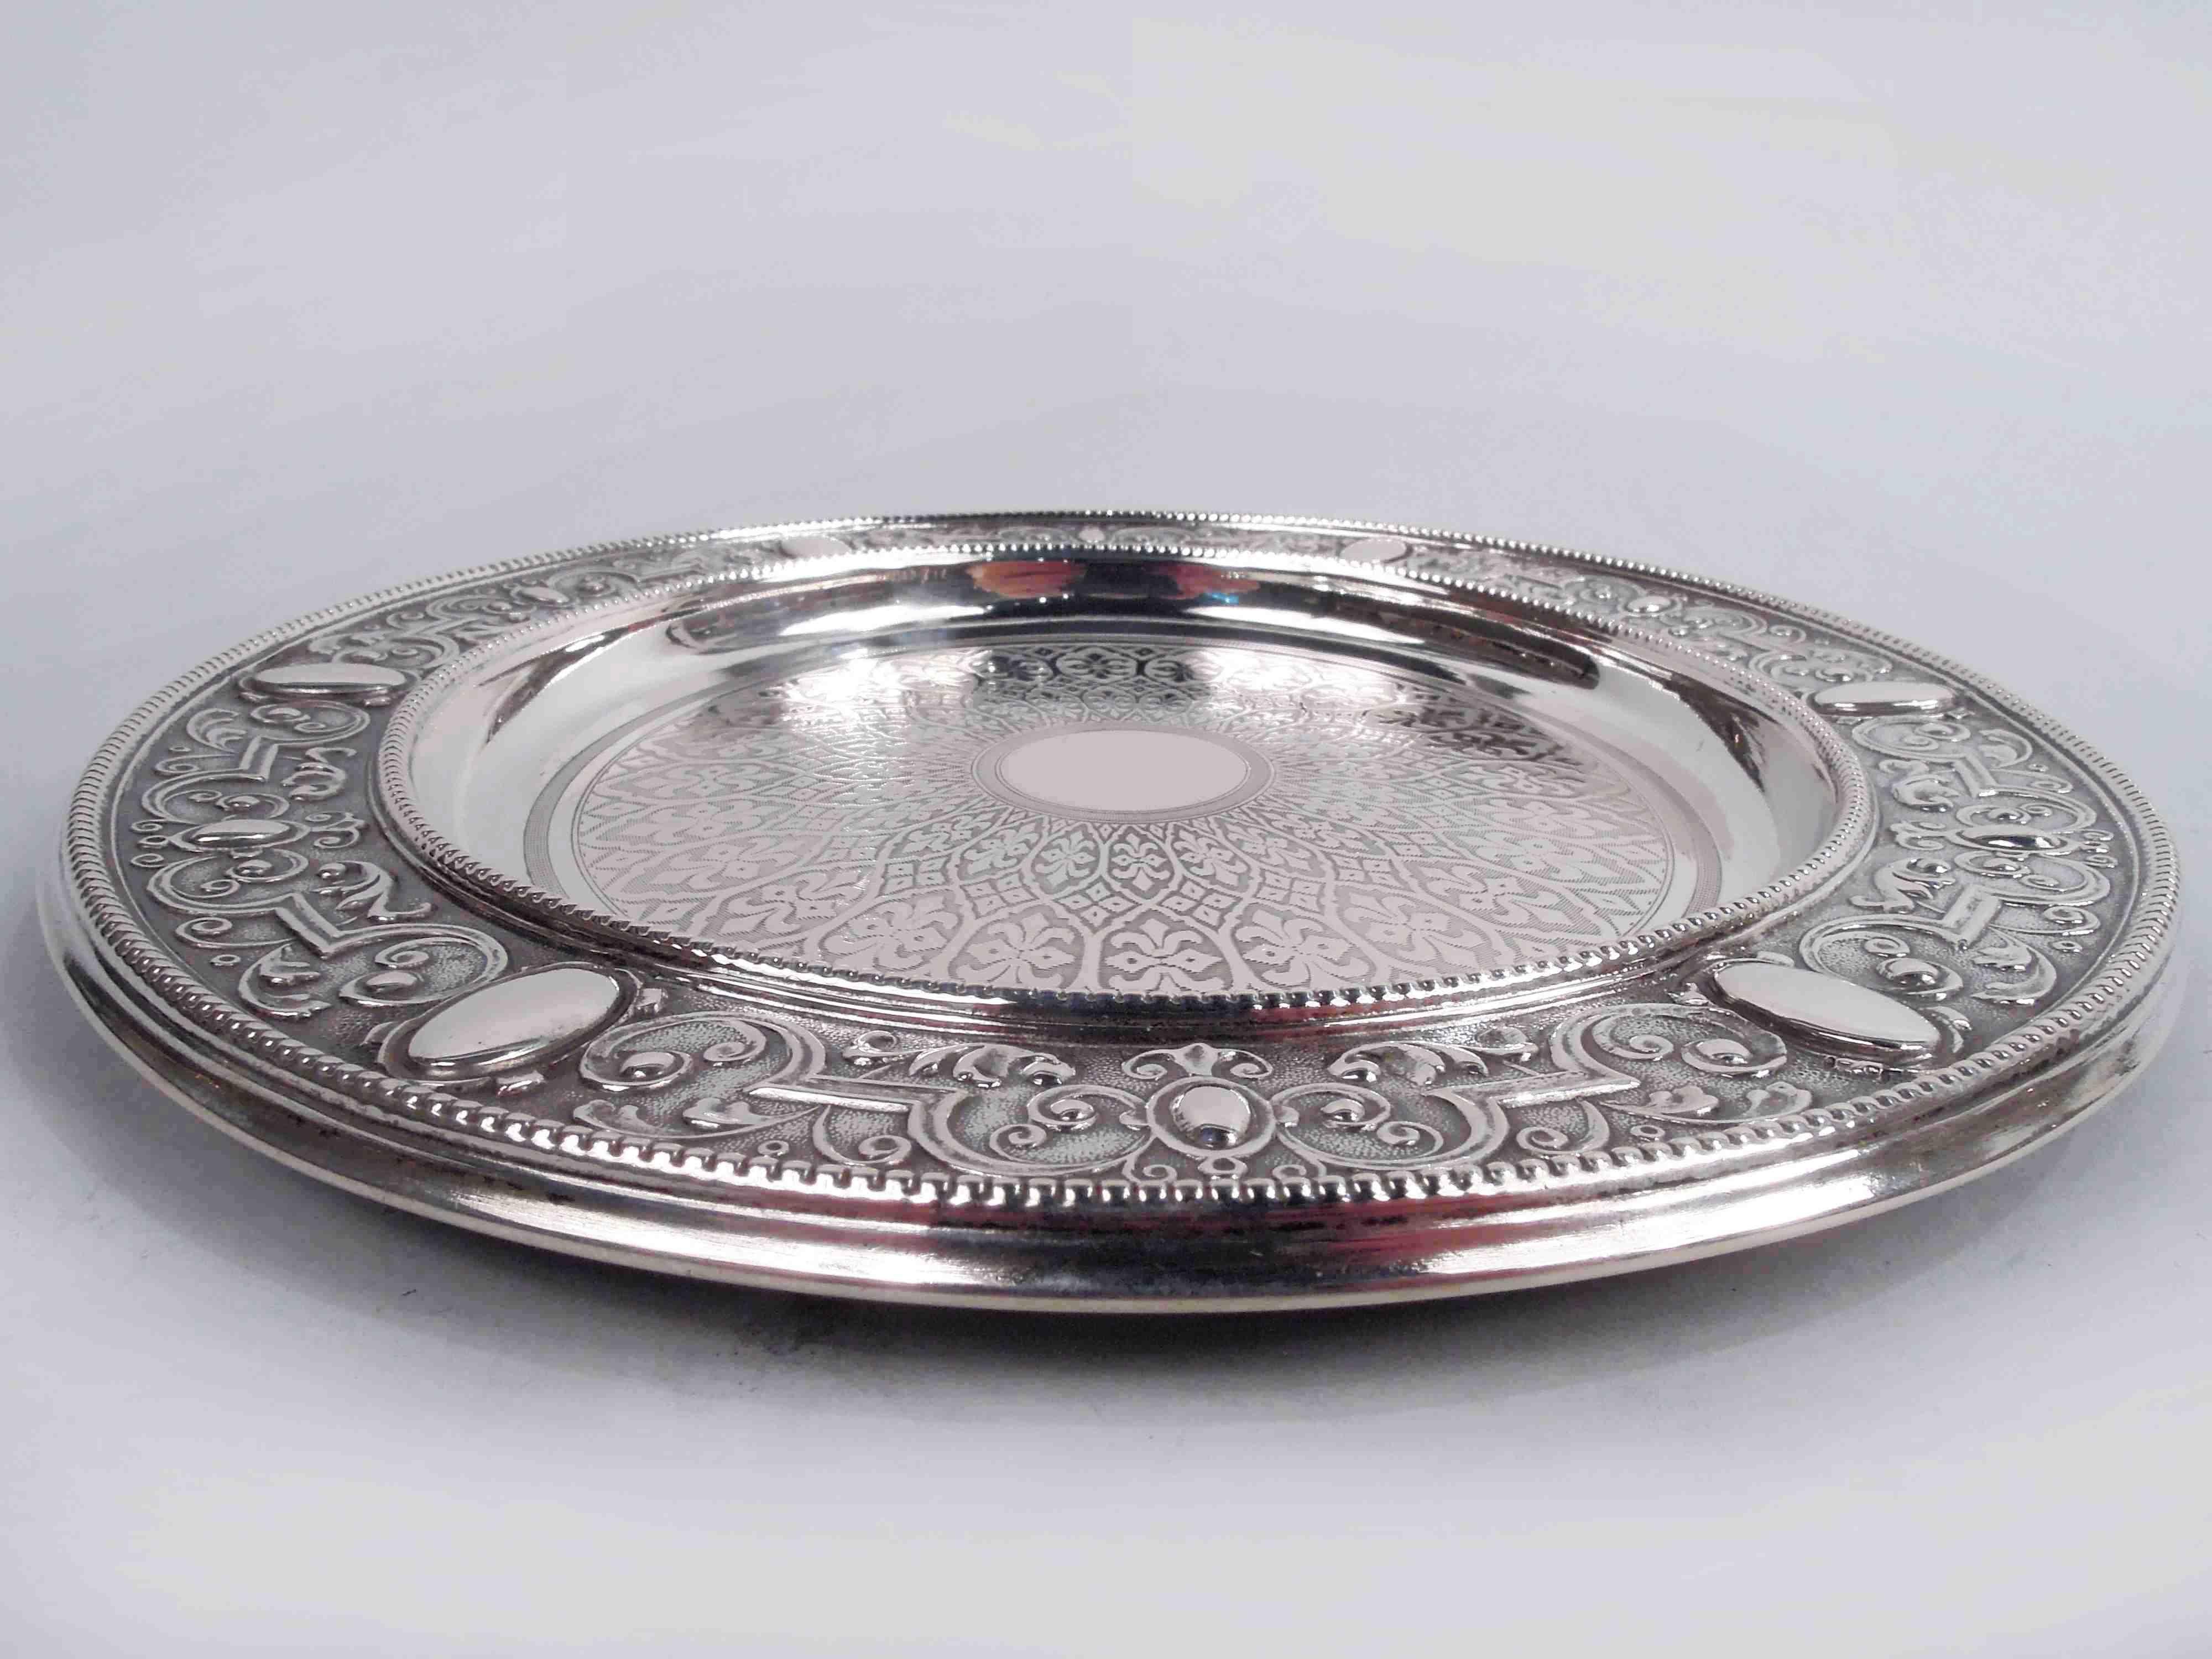 German Renaissance 800 silver wine bottle coaster, ca 1890. Round and deep well. Central rondel (vacant) in engine-turned frame radiating leaf and scroll ornament on lined ground. Wide and flat rim with embossed curvilinear scrollwork and ovals